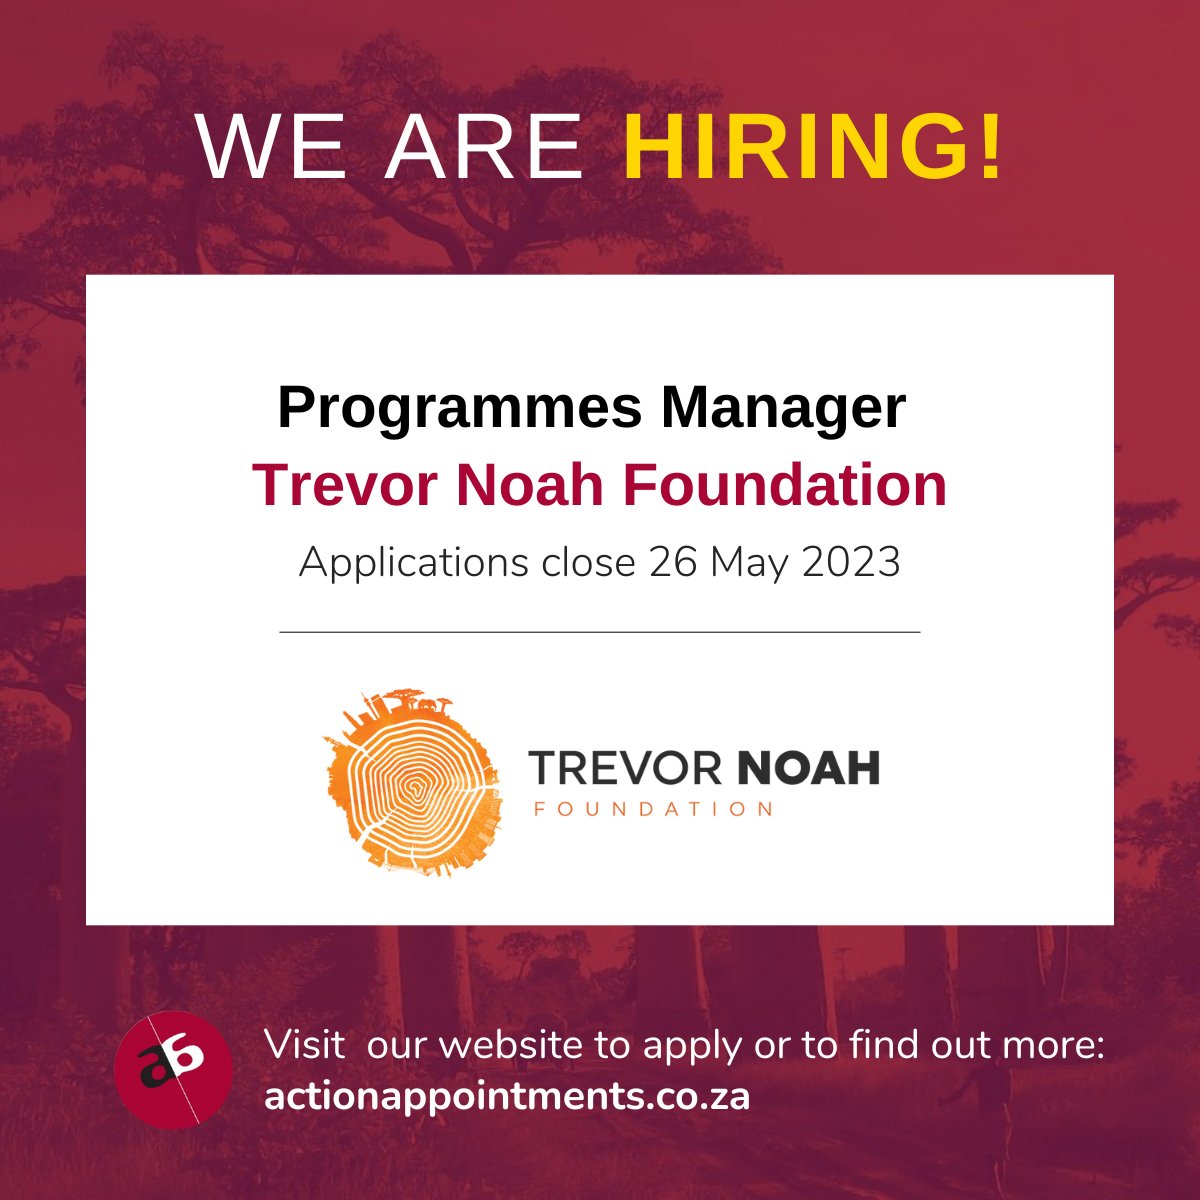 VACANCY! Action Appointments is recruiting a Programmes Manager for the @TrevorNoahFdn, based in Johannesburg.

For more information, visit the link below:
actionappointments.co.za/vacancies/trev…

#hiring #programmemanager #education #trevornoah #foundation #management #communitydevelopment